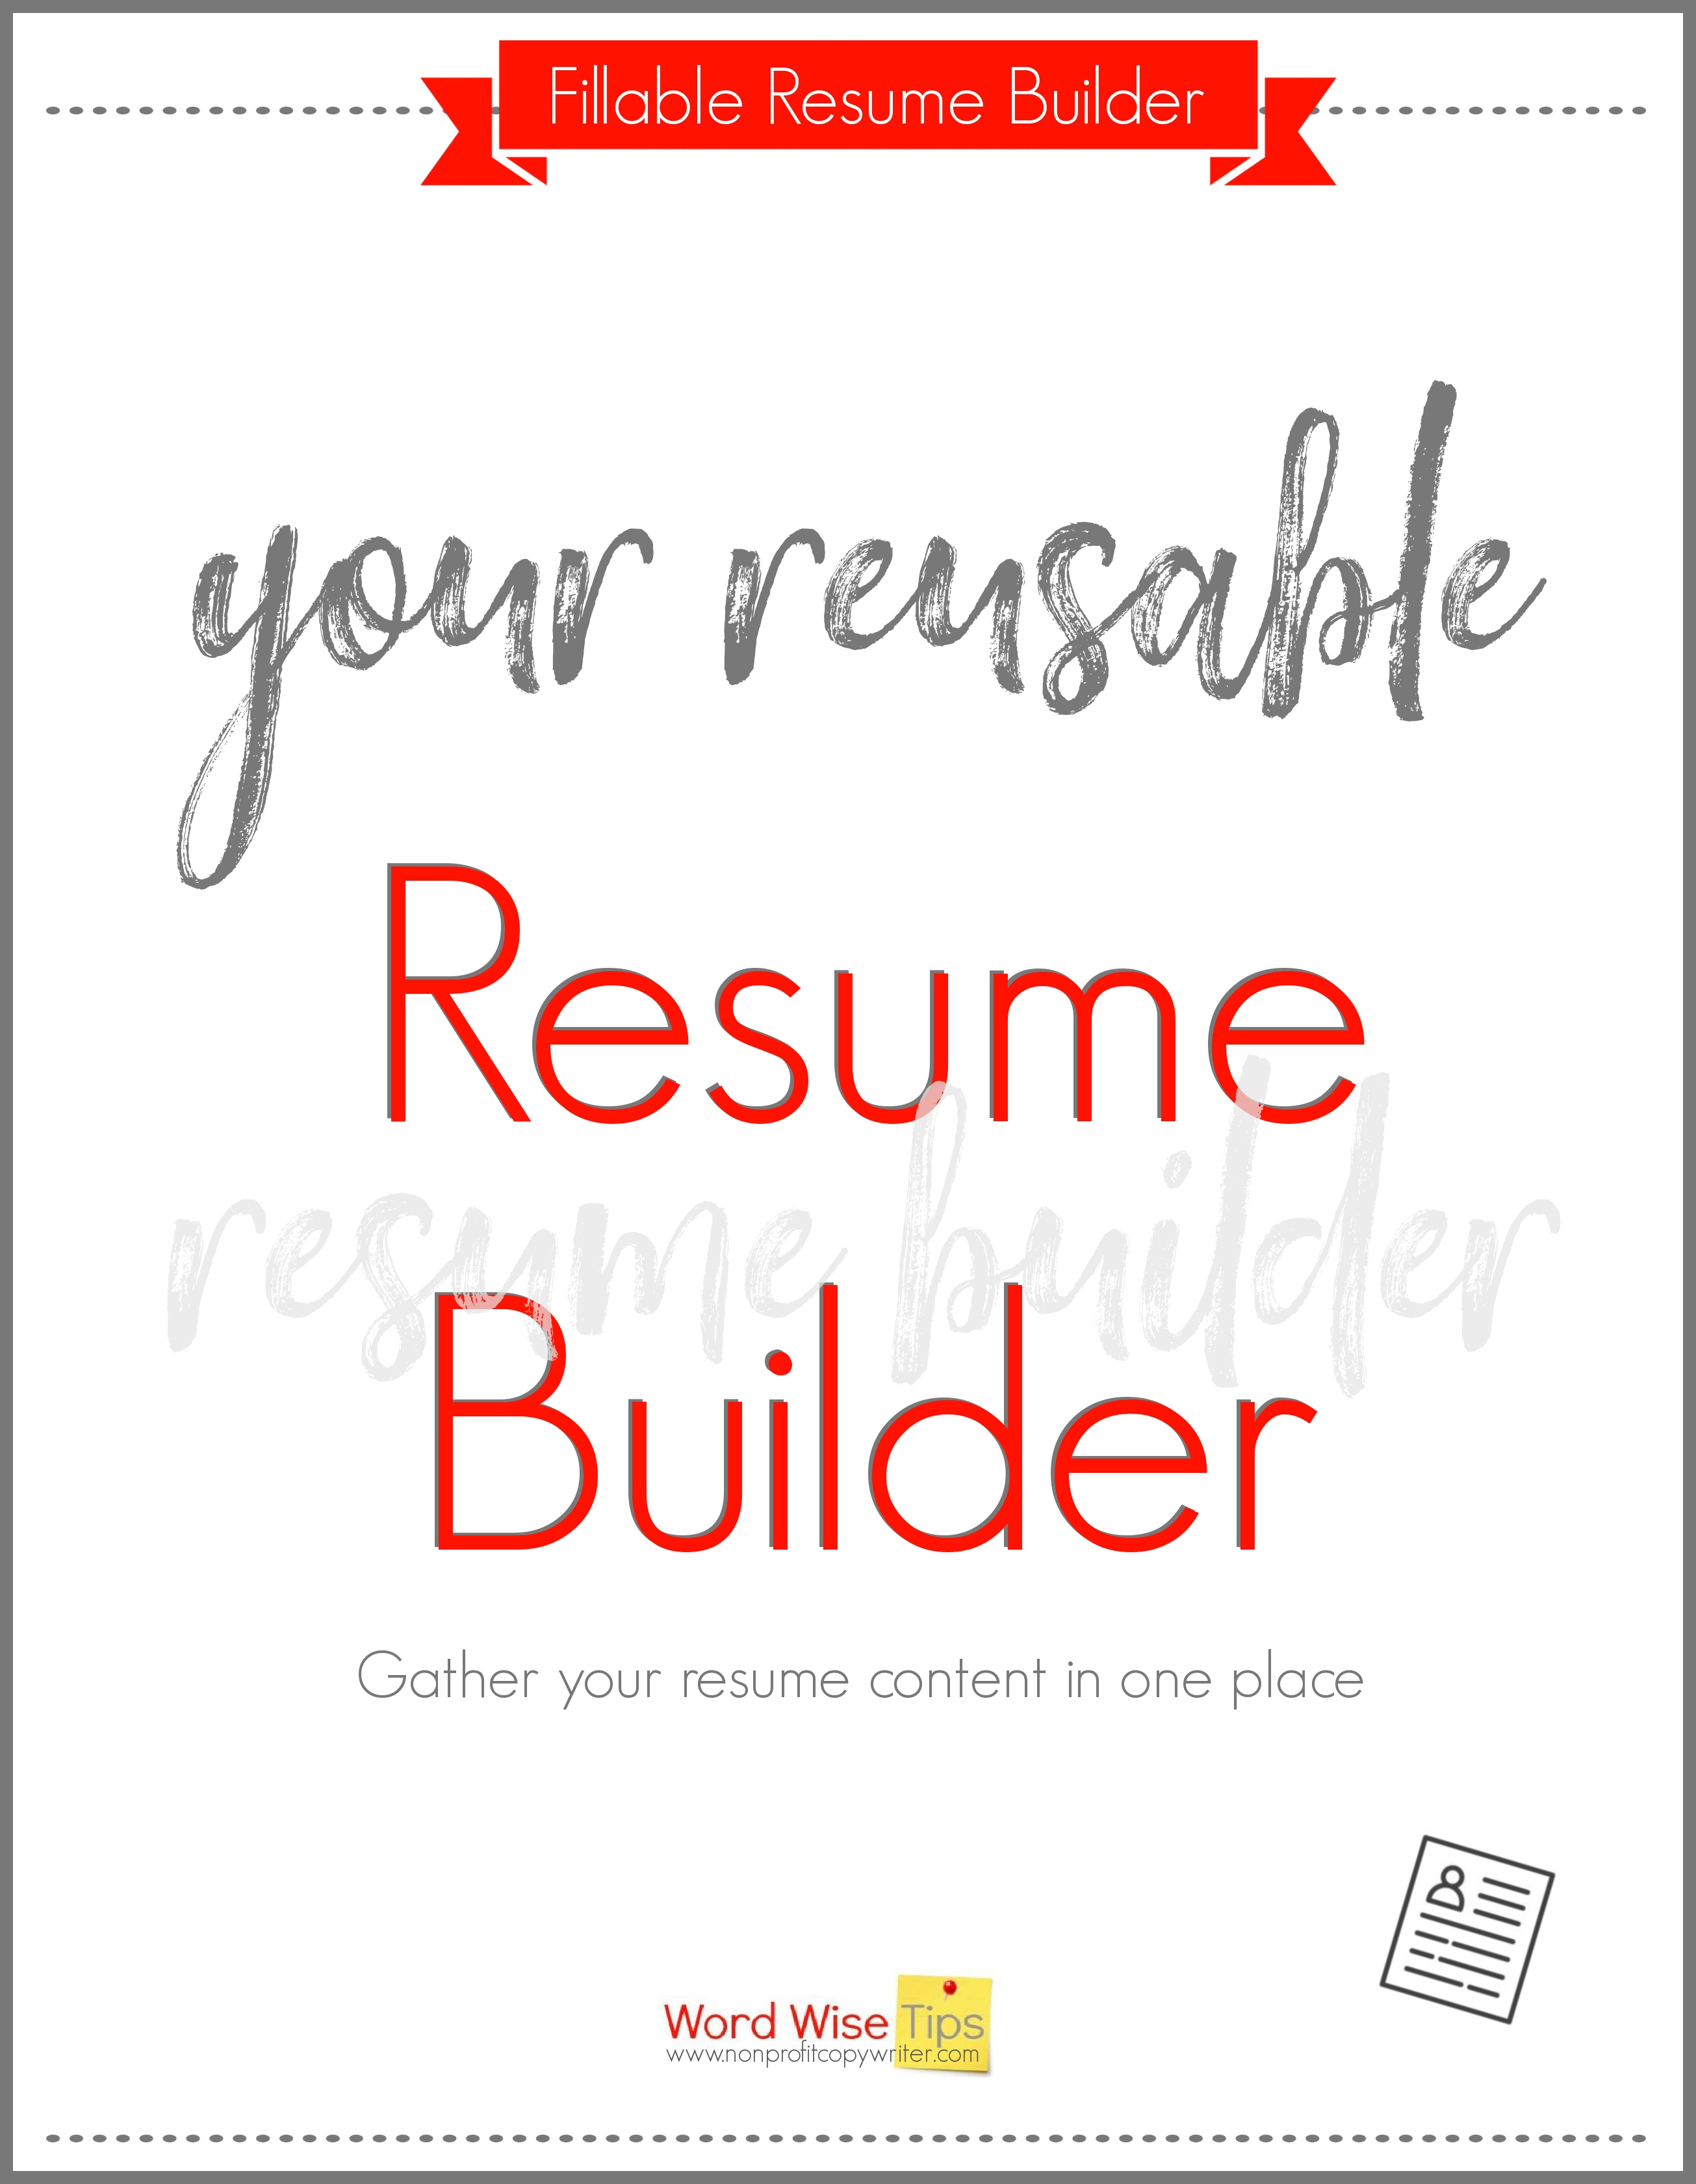 Fillable, reusable resume builder with Word Wise at Nonprofit Copywriter #WritingTips #Resumes